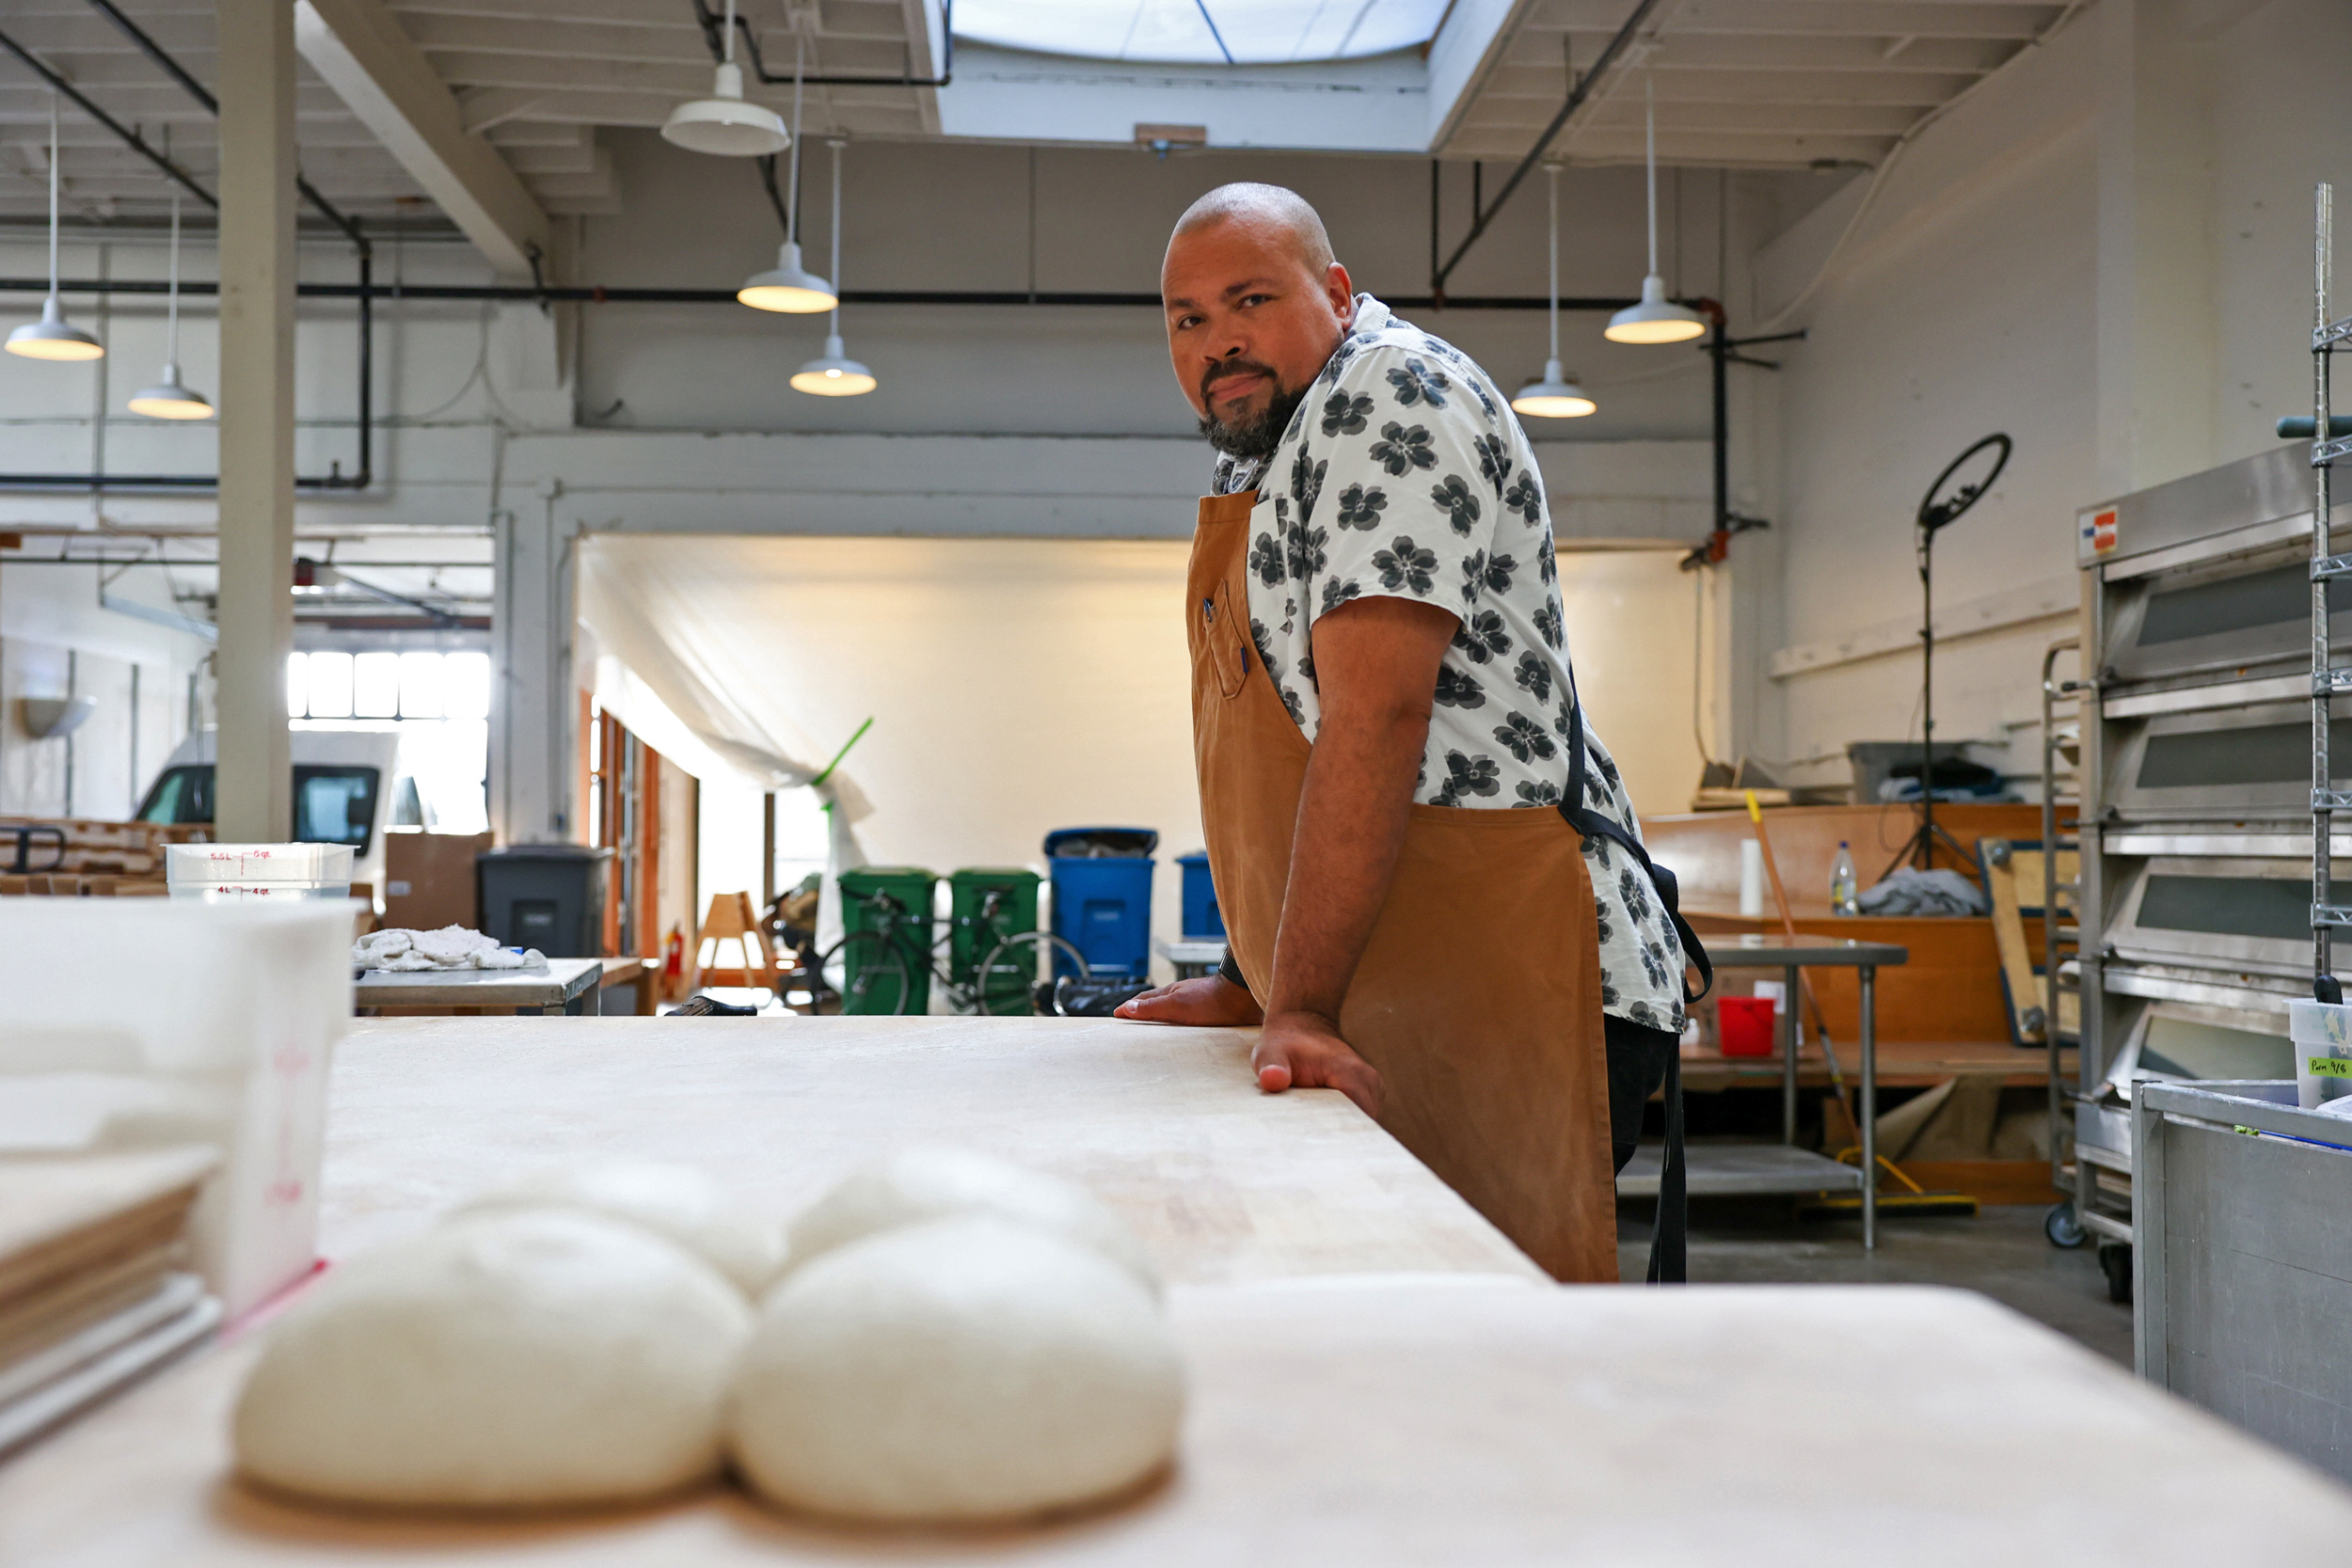 A shaven-headed man wearing a patterned short-sleeve shirt and a khaki apron stands next to a flat white table. Round balls of sourdough sit within his reach.